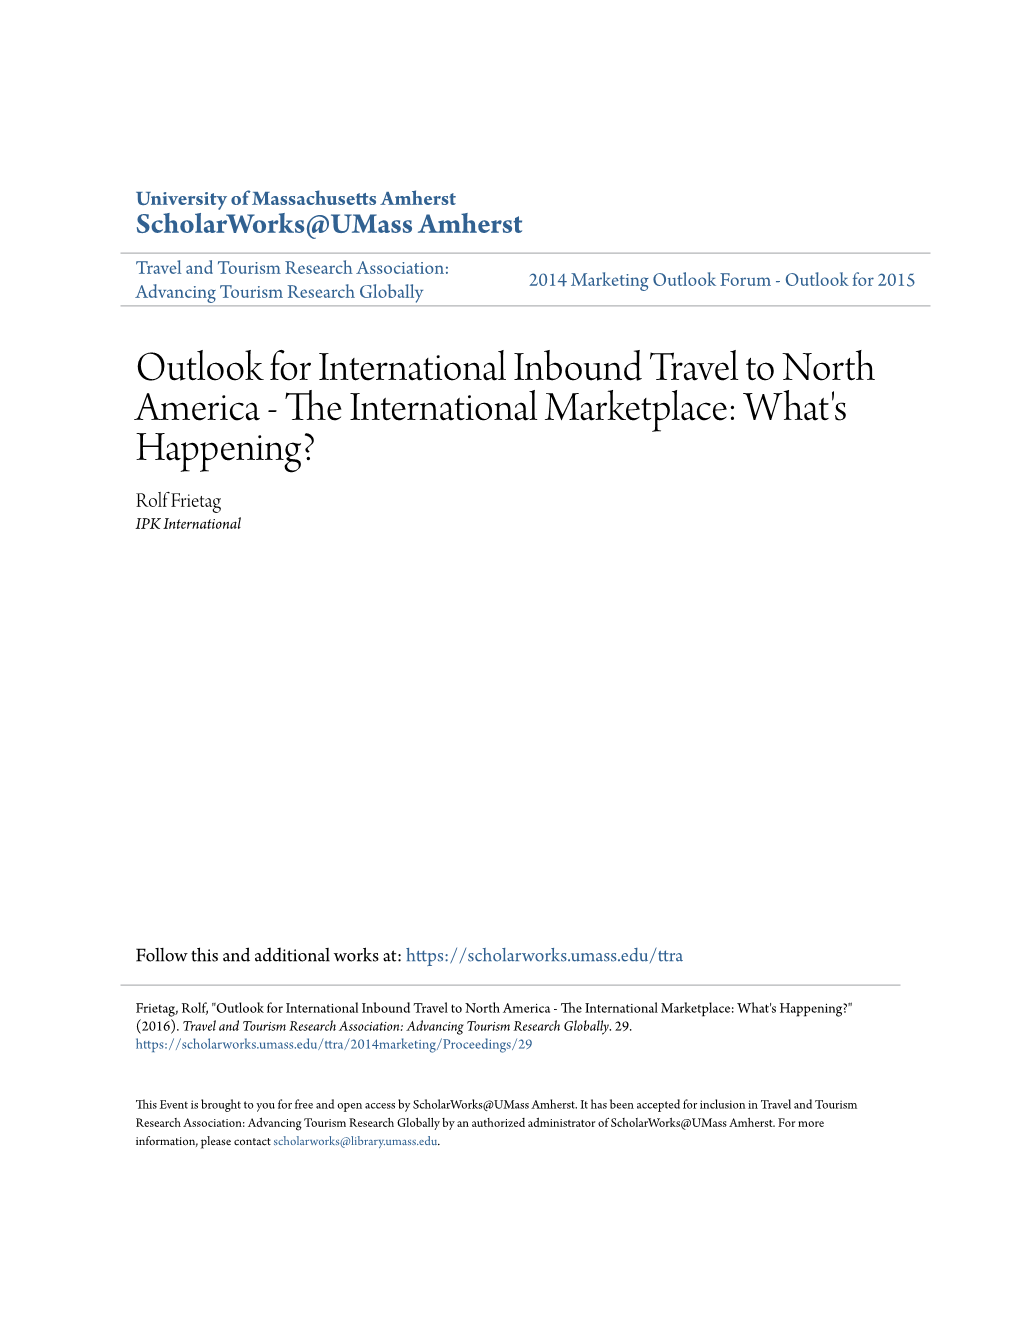 Outlook for International Inbound Travel to North America - the Ni Ternational Marketplace: What's Happening? Rolf Frietag IPK International